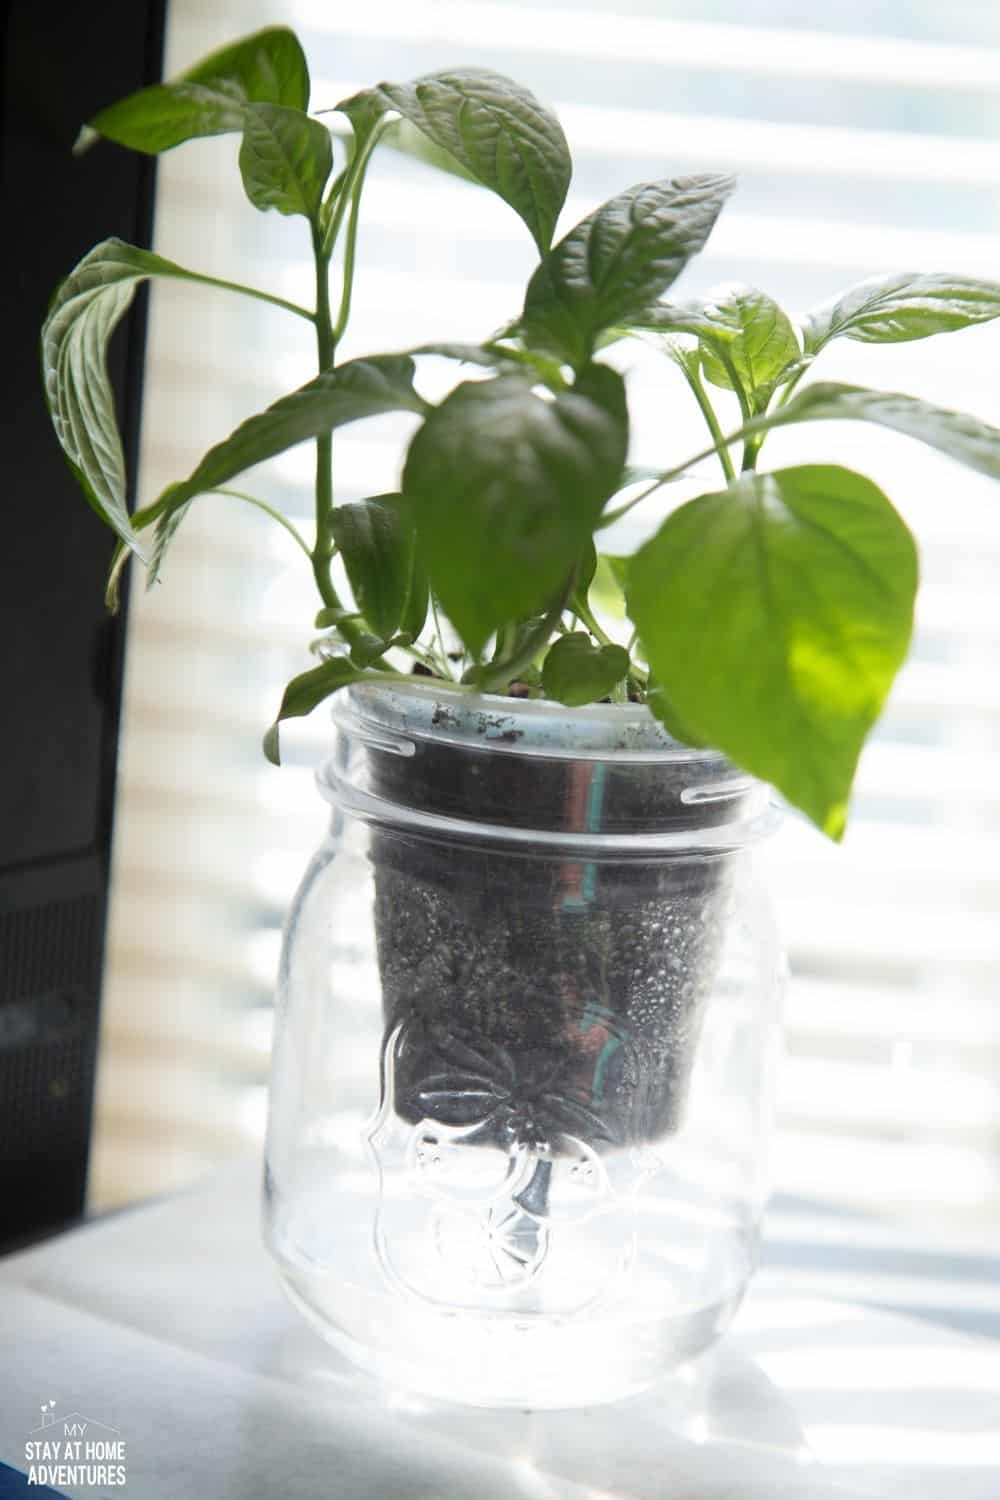 Check out this awesome DIY Self-Watering Plastic Bottle Seed Starter you can do with your kids! A step by step guide showing you how to create a self-watering seed starter using plastic water bottles. The good news is that they do work! via @mystayathome